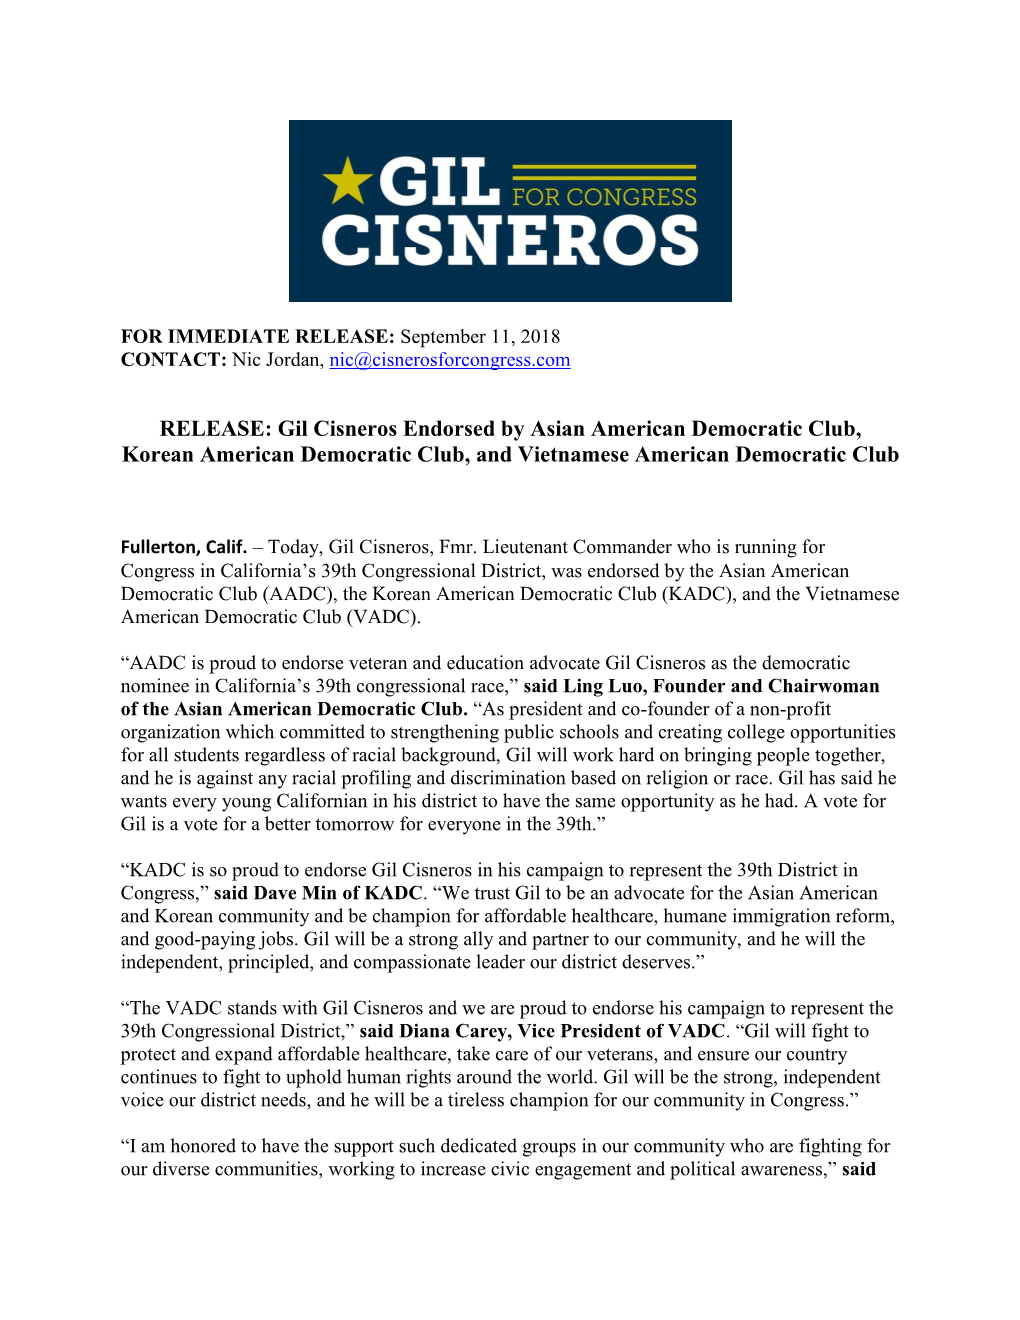 Gil Cisneros Endorsed by Asian American Democratic Club, Korean American Democratic Club, and Vietnamese American Democratic Club